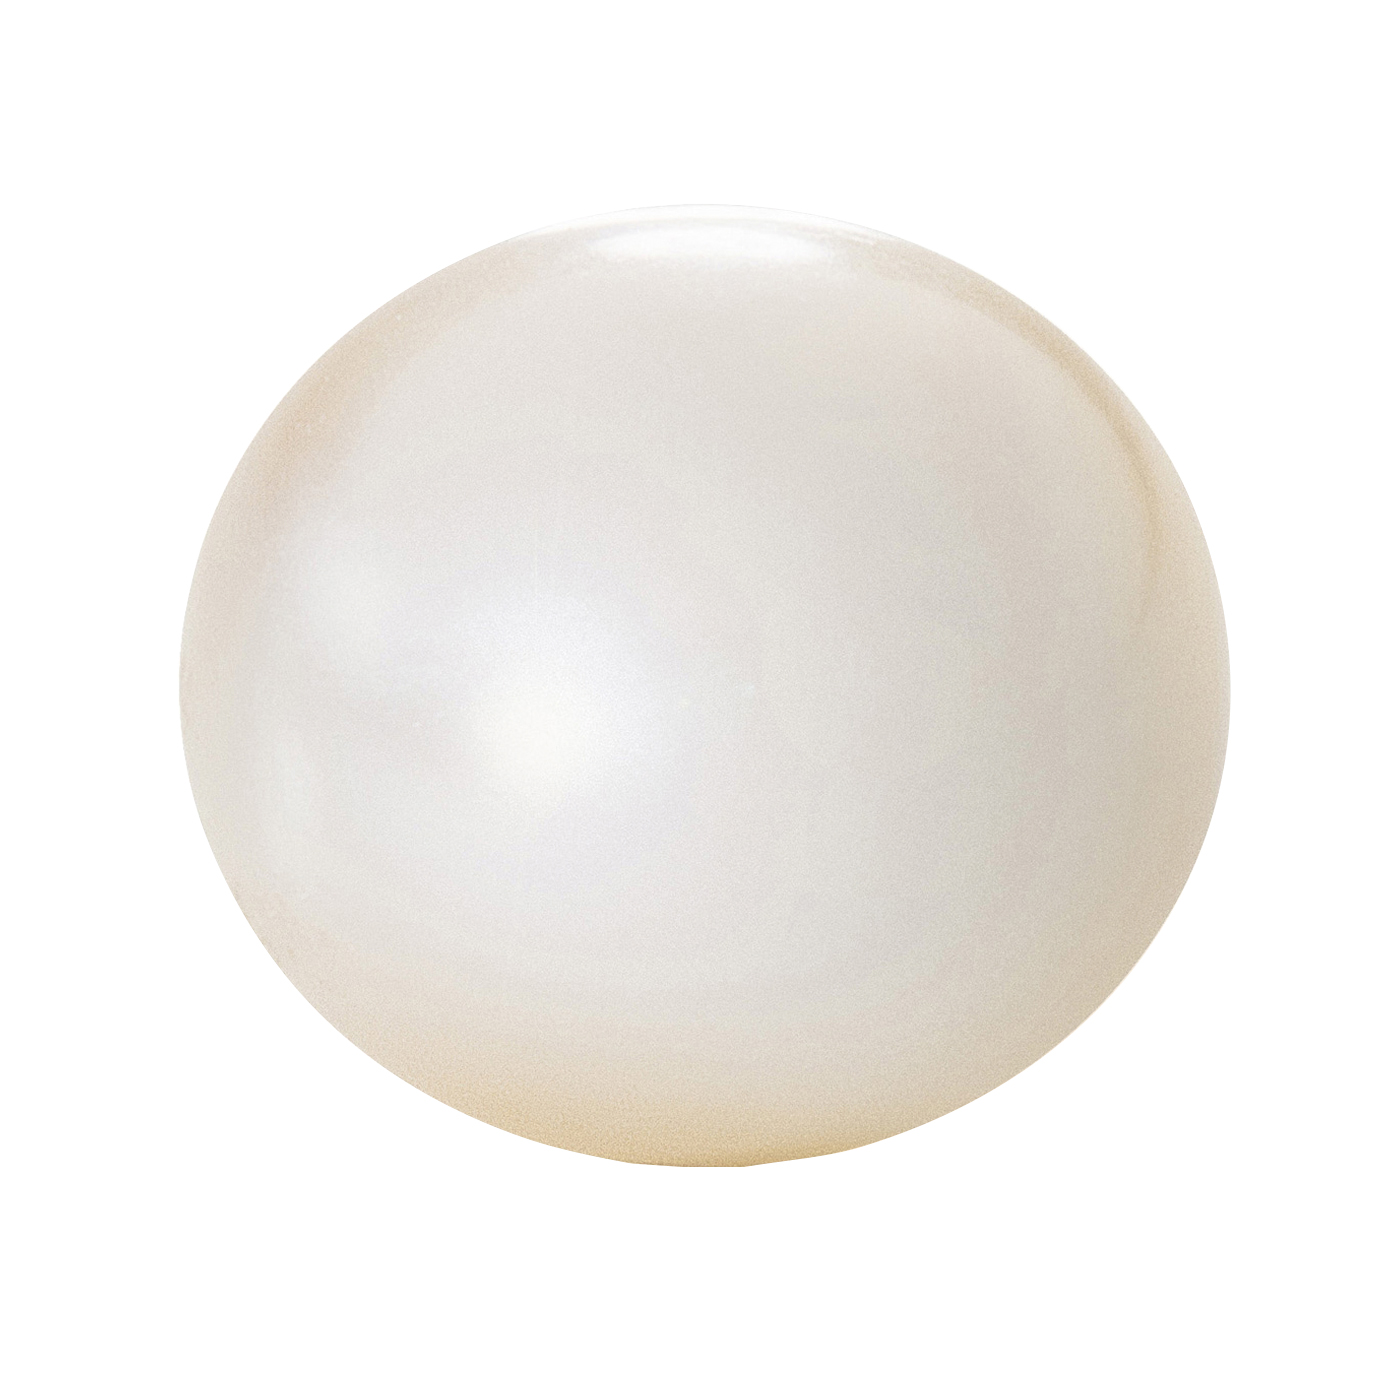 Cultured Pearl, Freshwater, Bouton, ø 6.0-6.5 mm, White - 1 piece